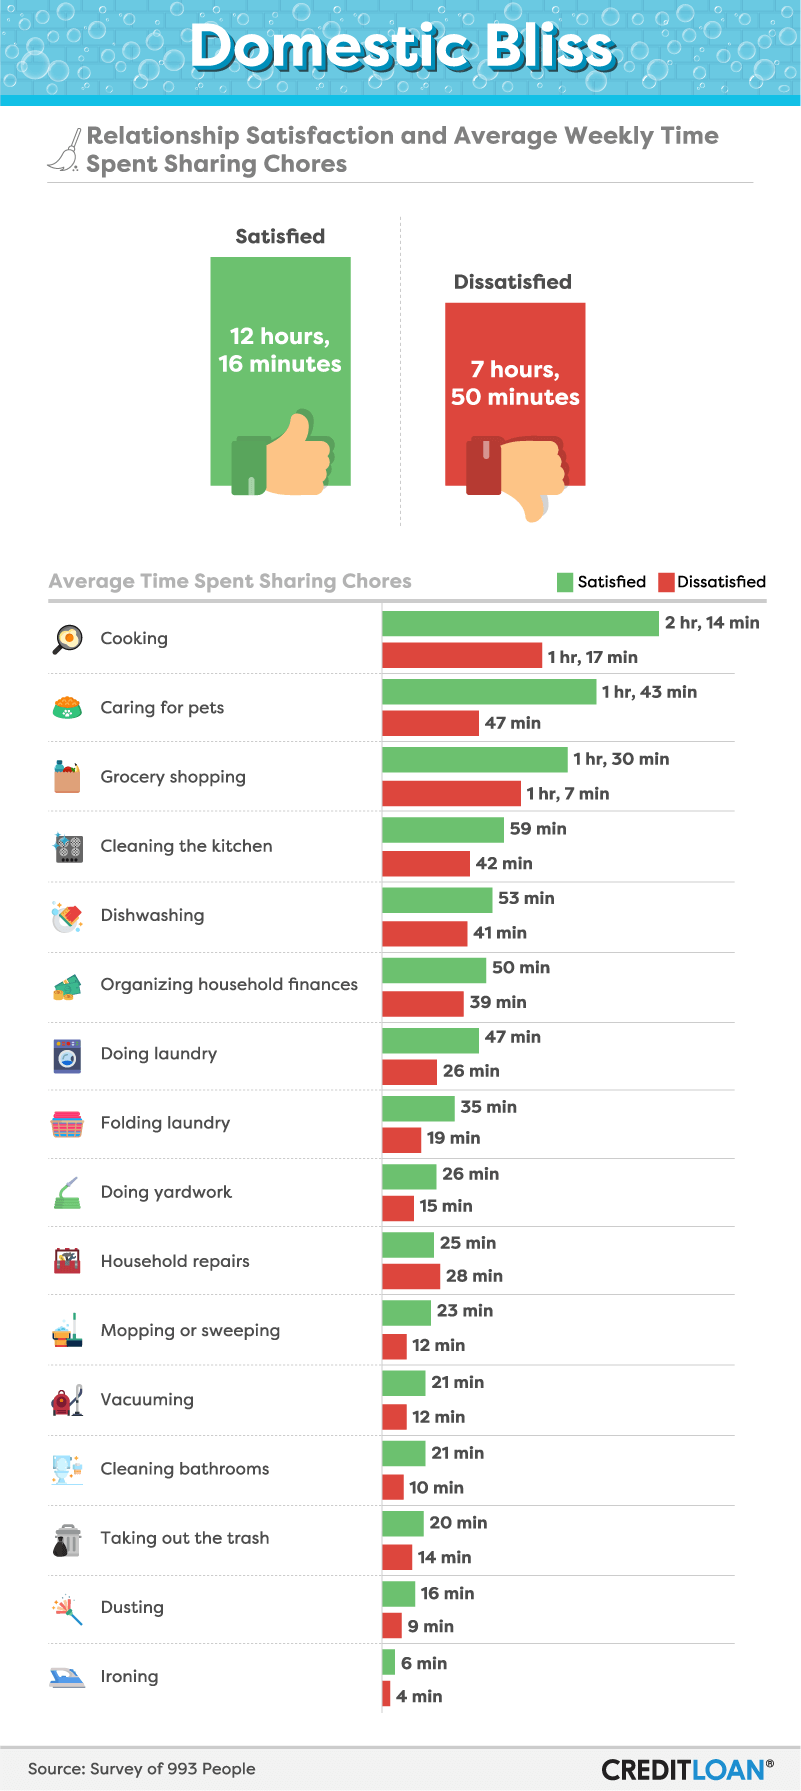 Domestic Bliss: Relationship Satisfaction and Average Weekly Time Spent Sharing Chores